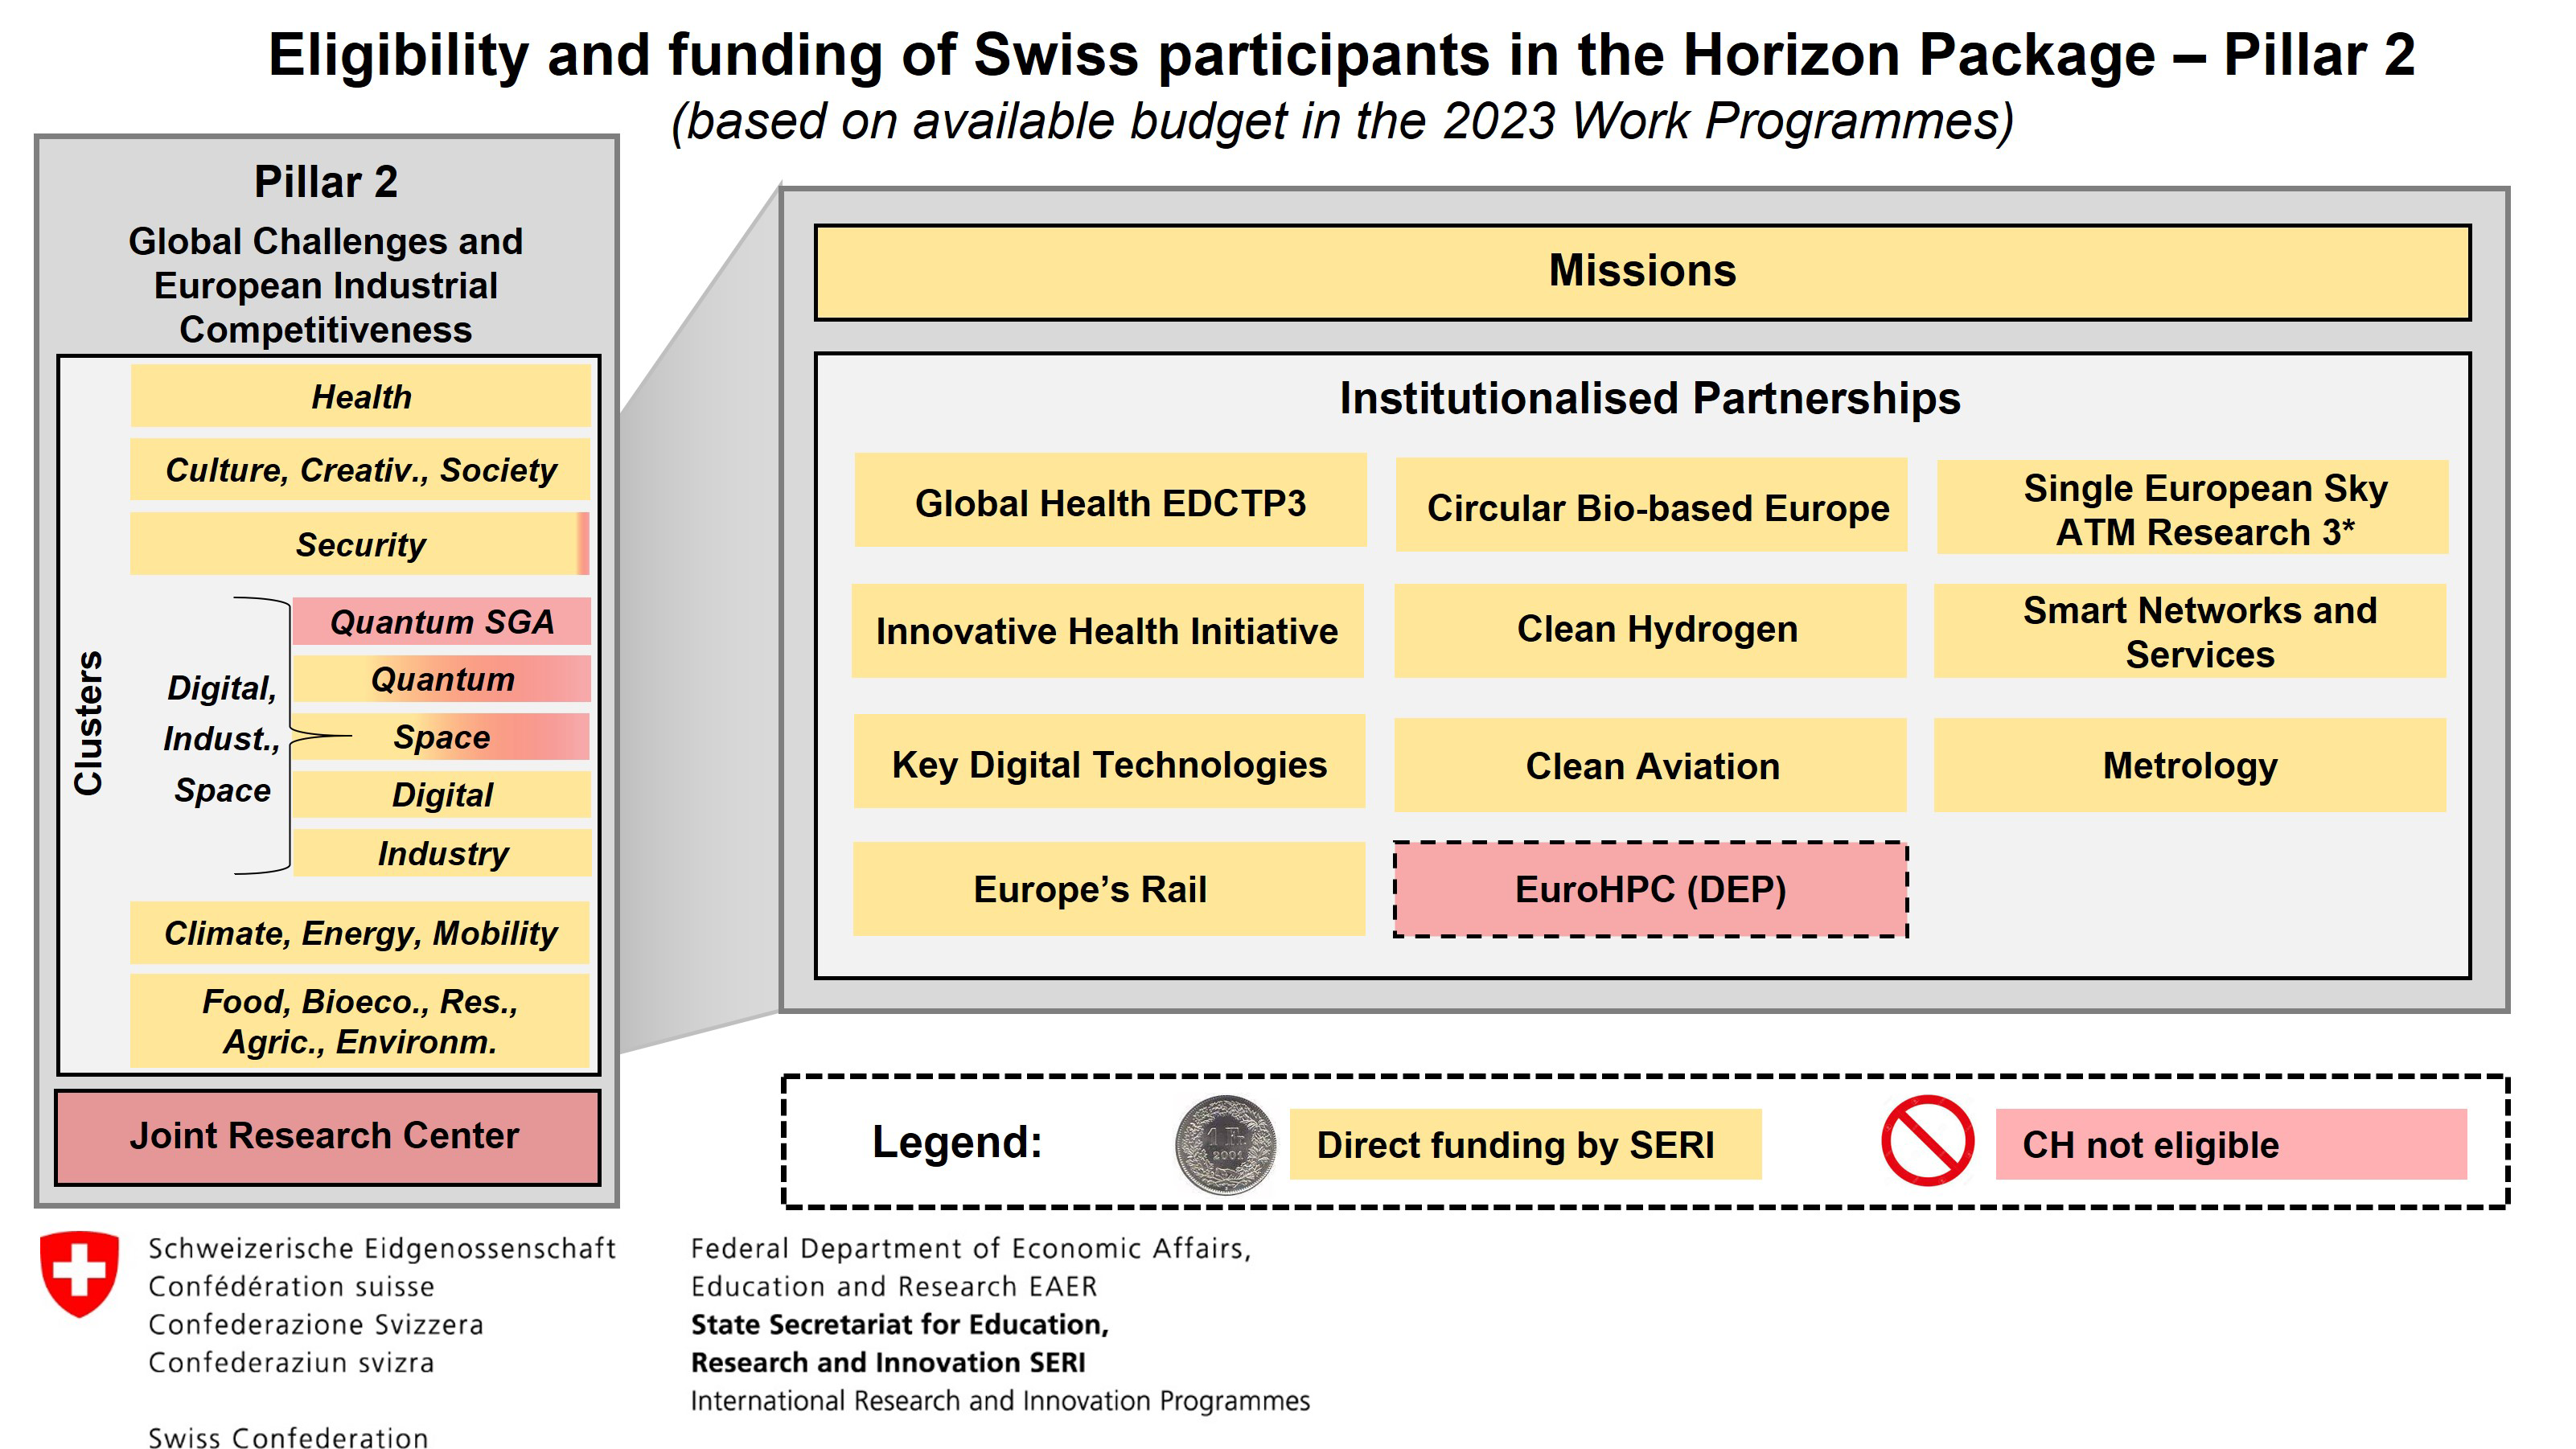 Eligibility and funding of Swiss participants in the Horizon Package – Pillar 2